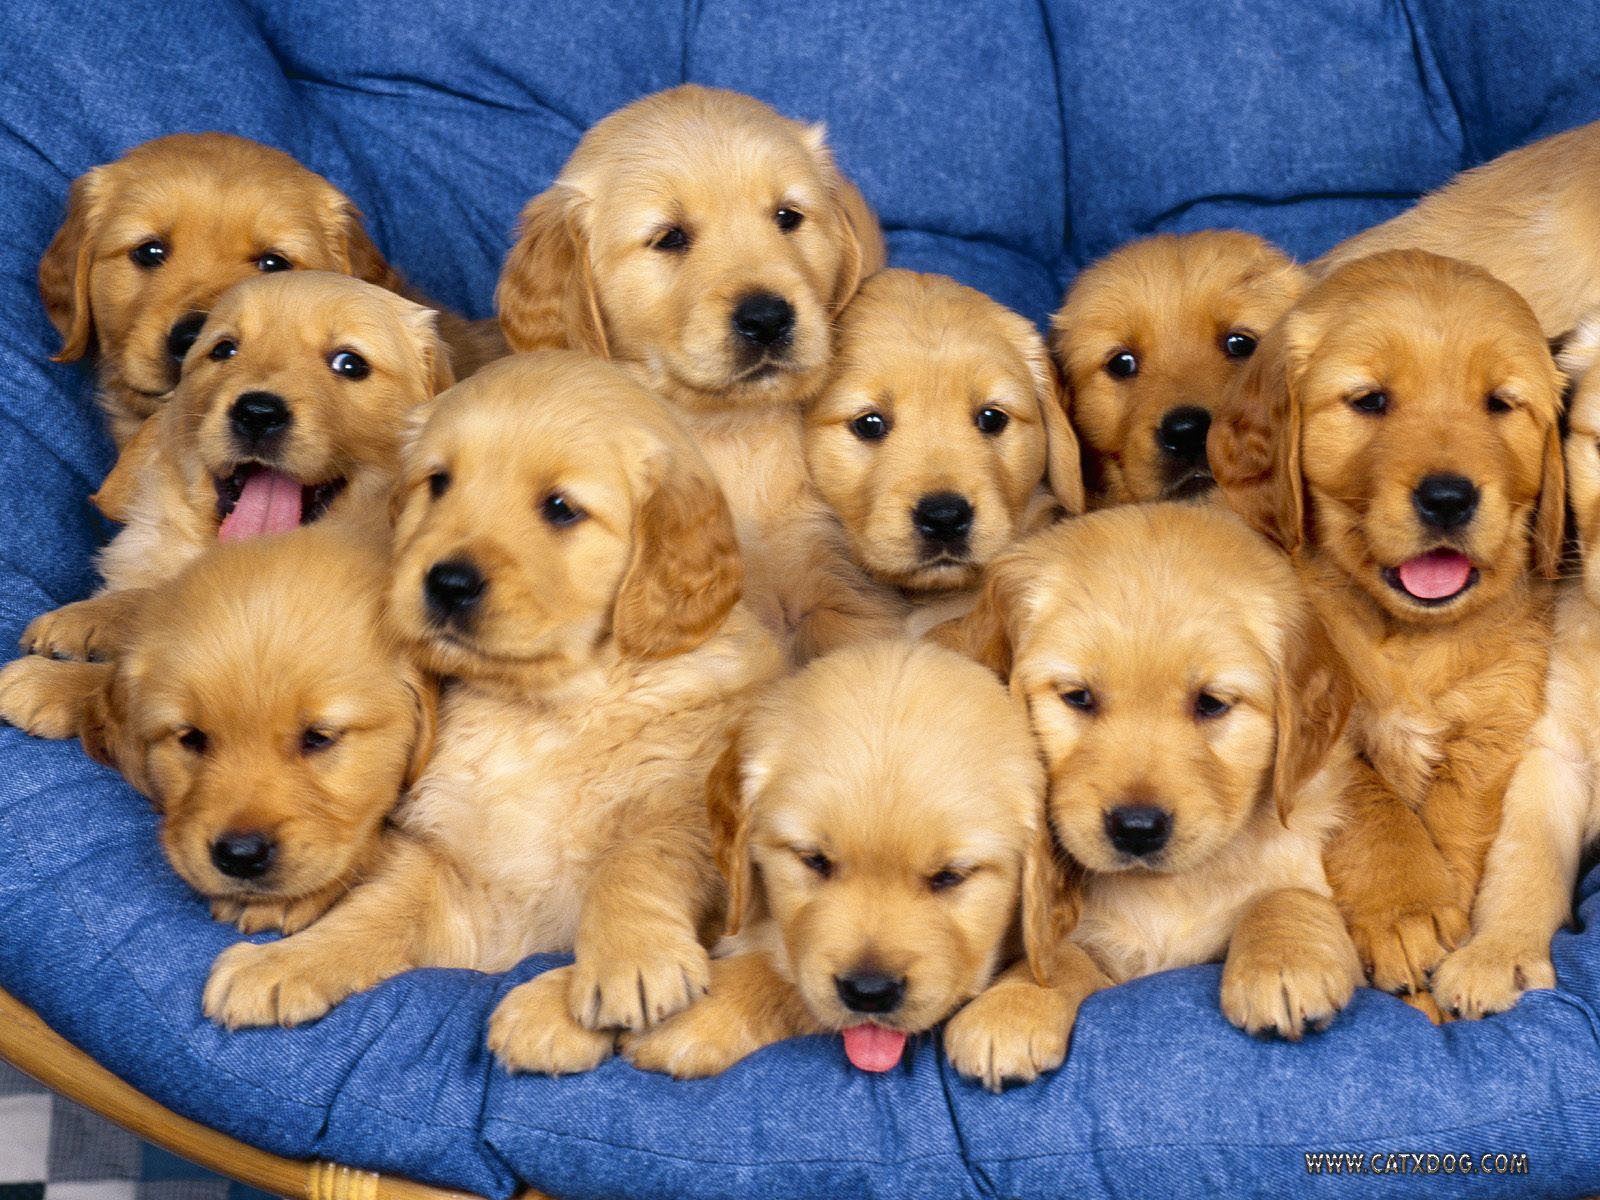 pic:puppies